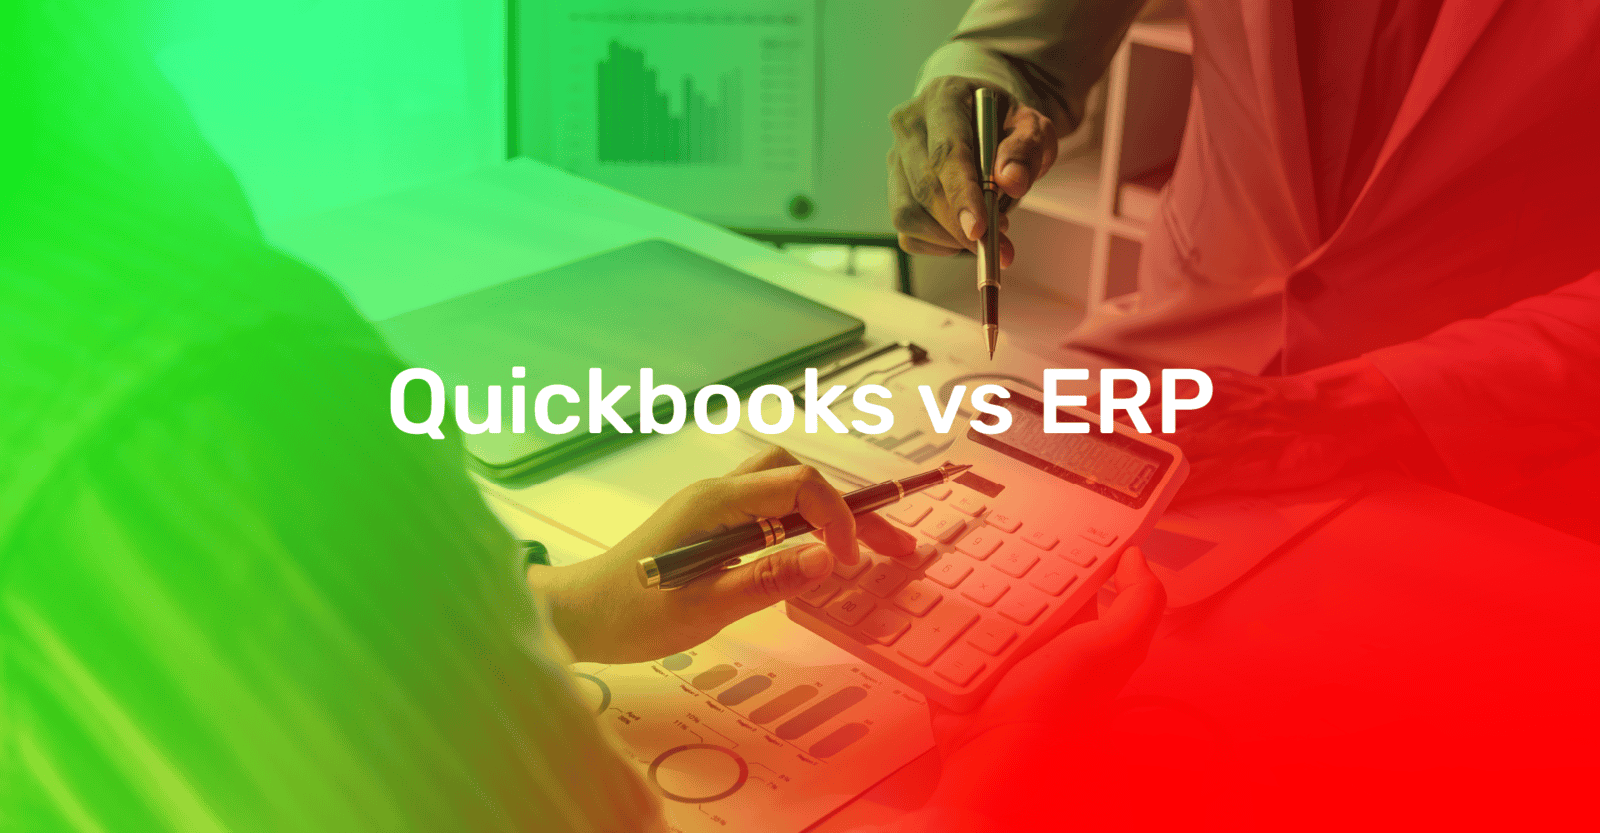 Quickbooks vs ERP: Which is best for you?